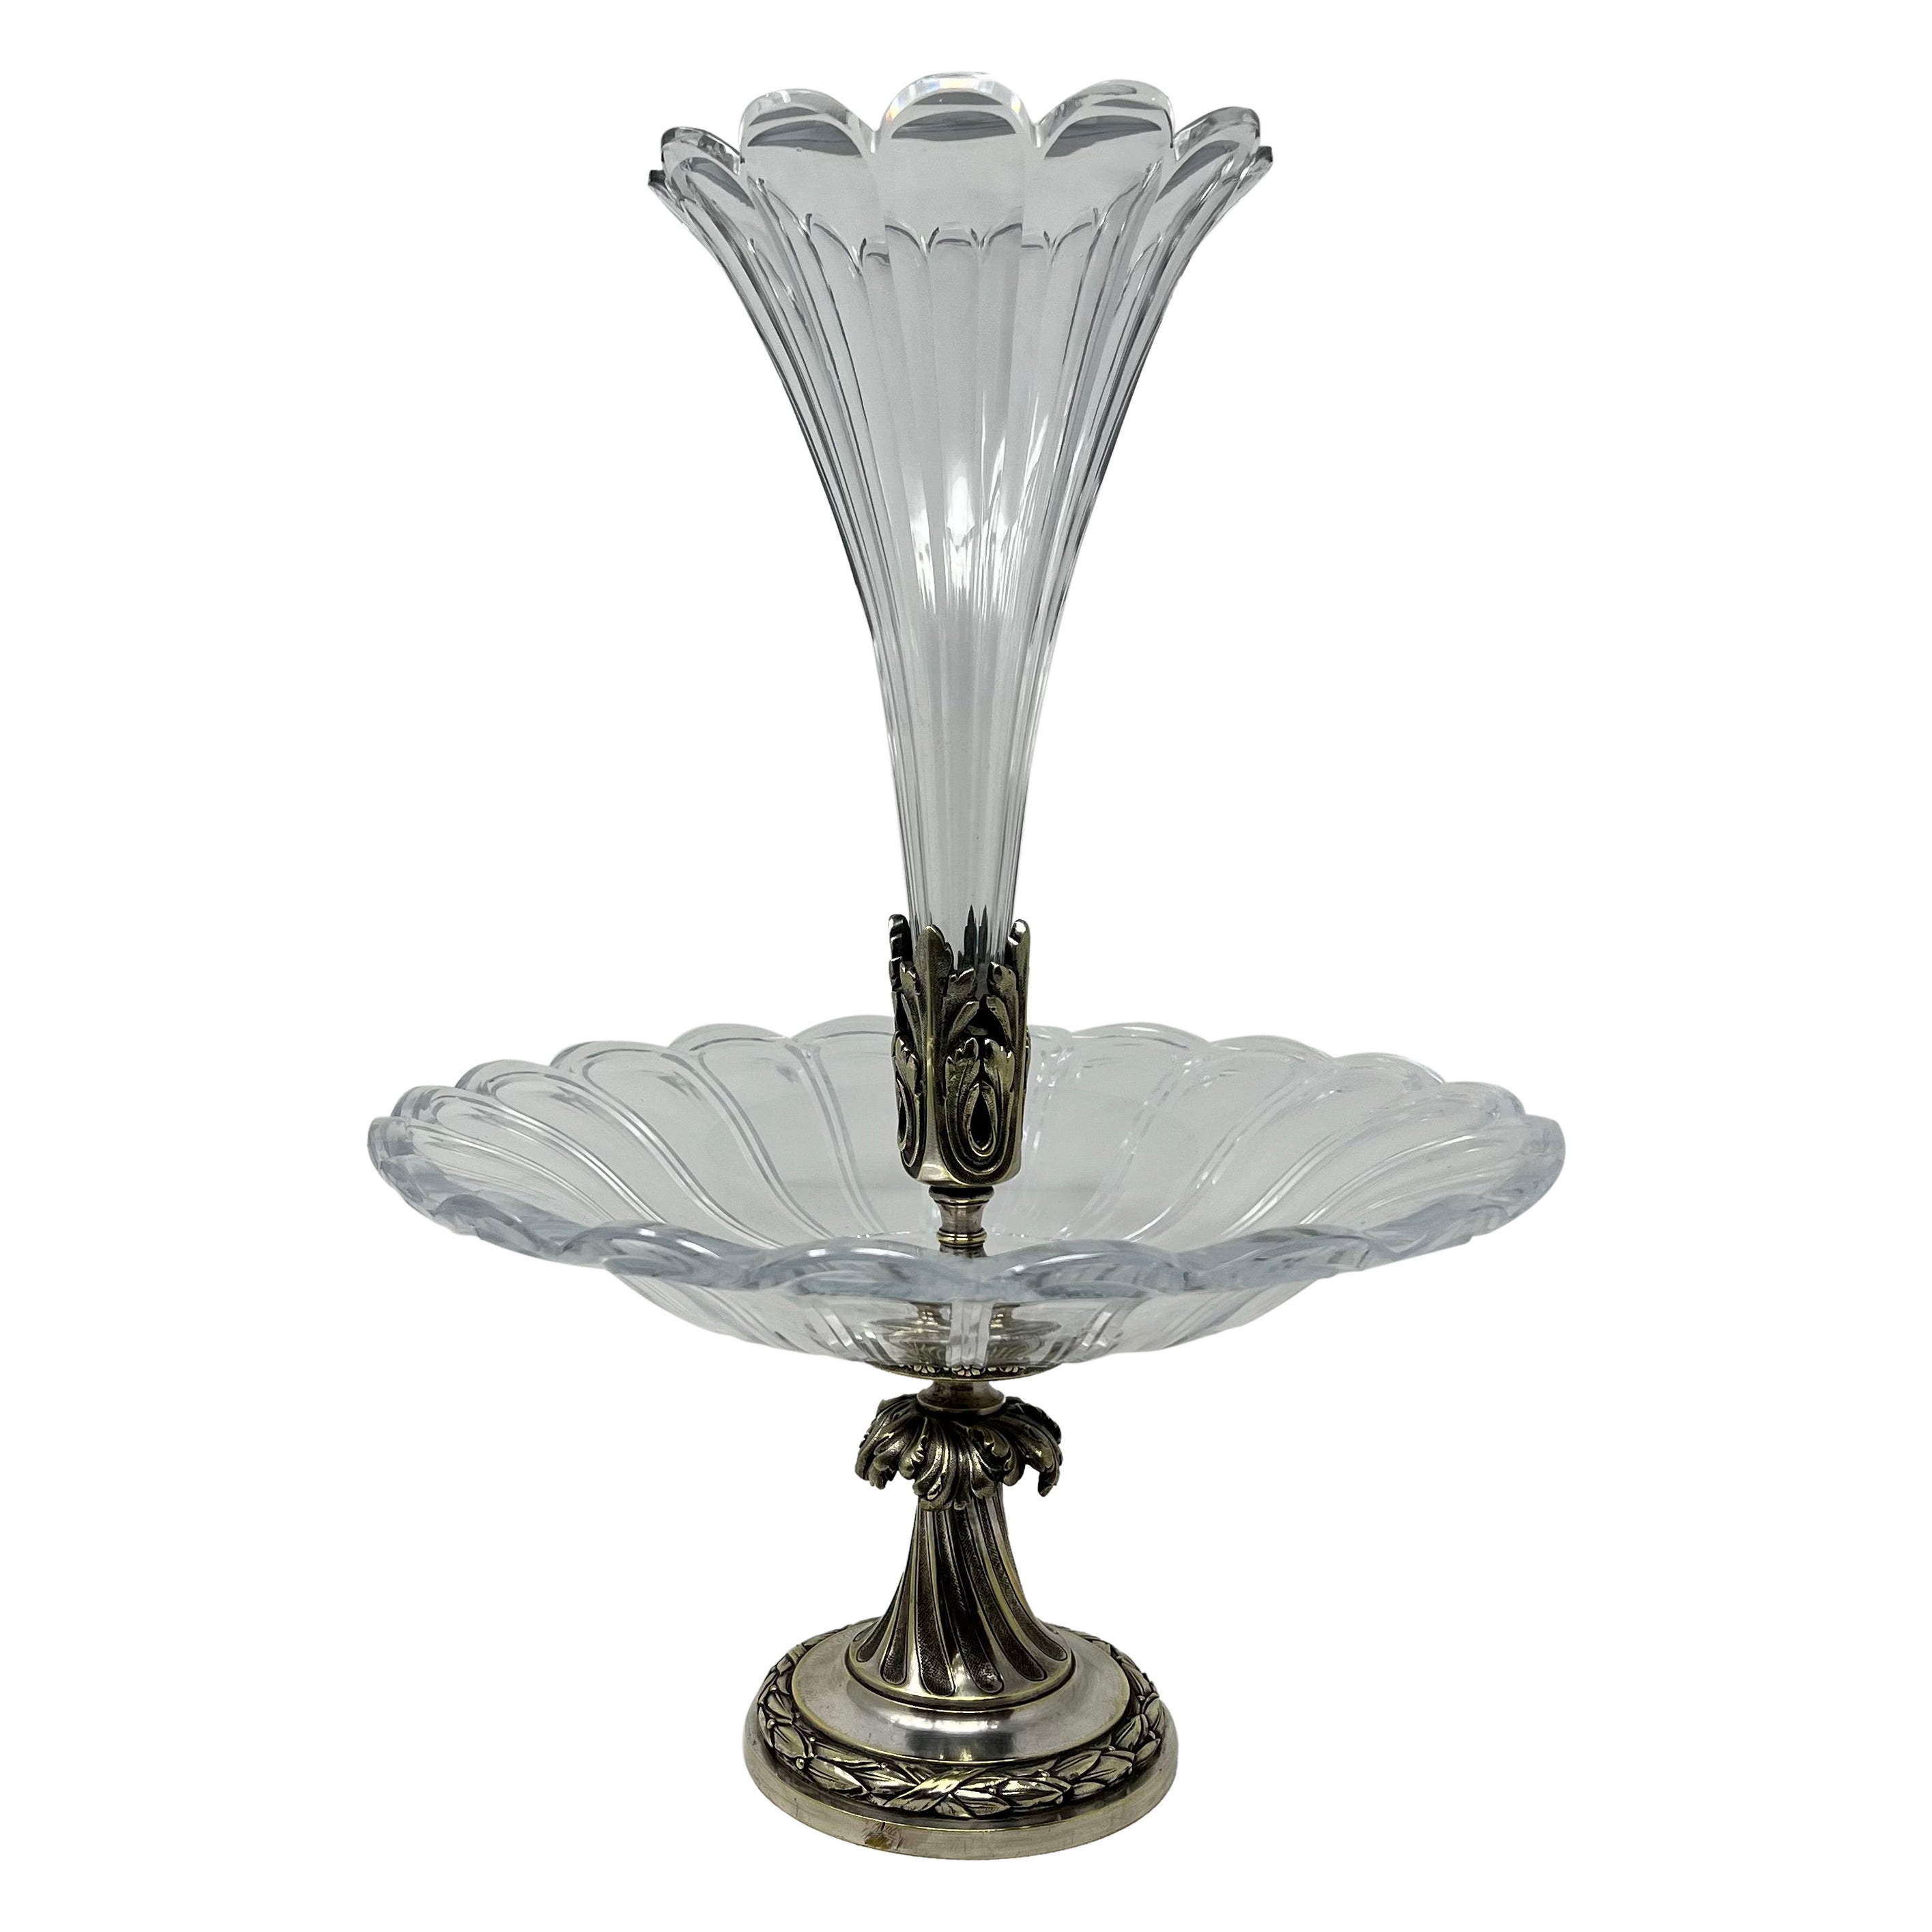 Antique French Silver on Bronze Baccarat Epergne circa 1865-75